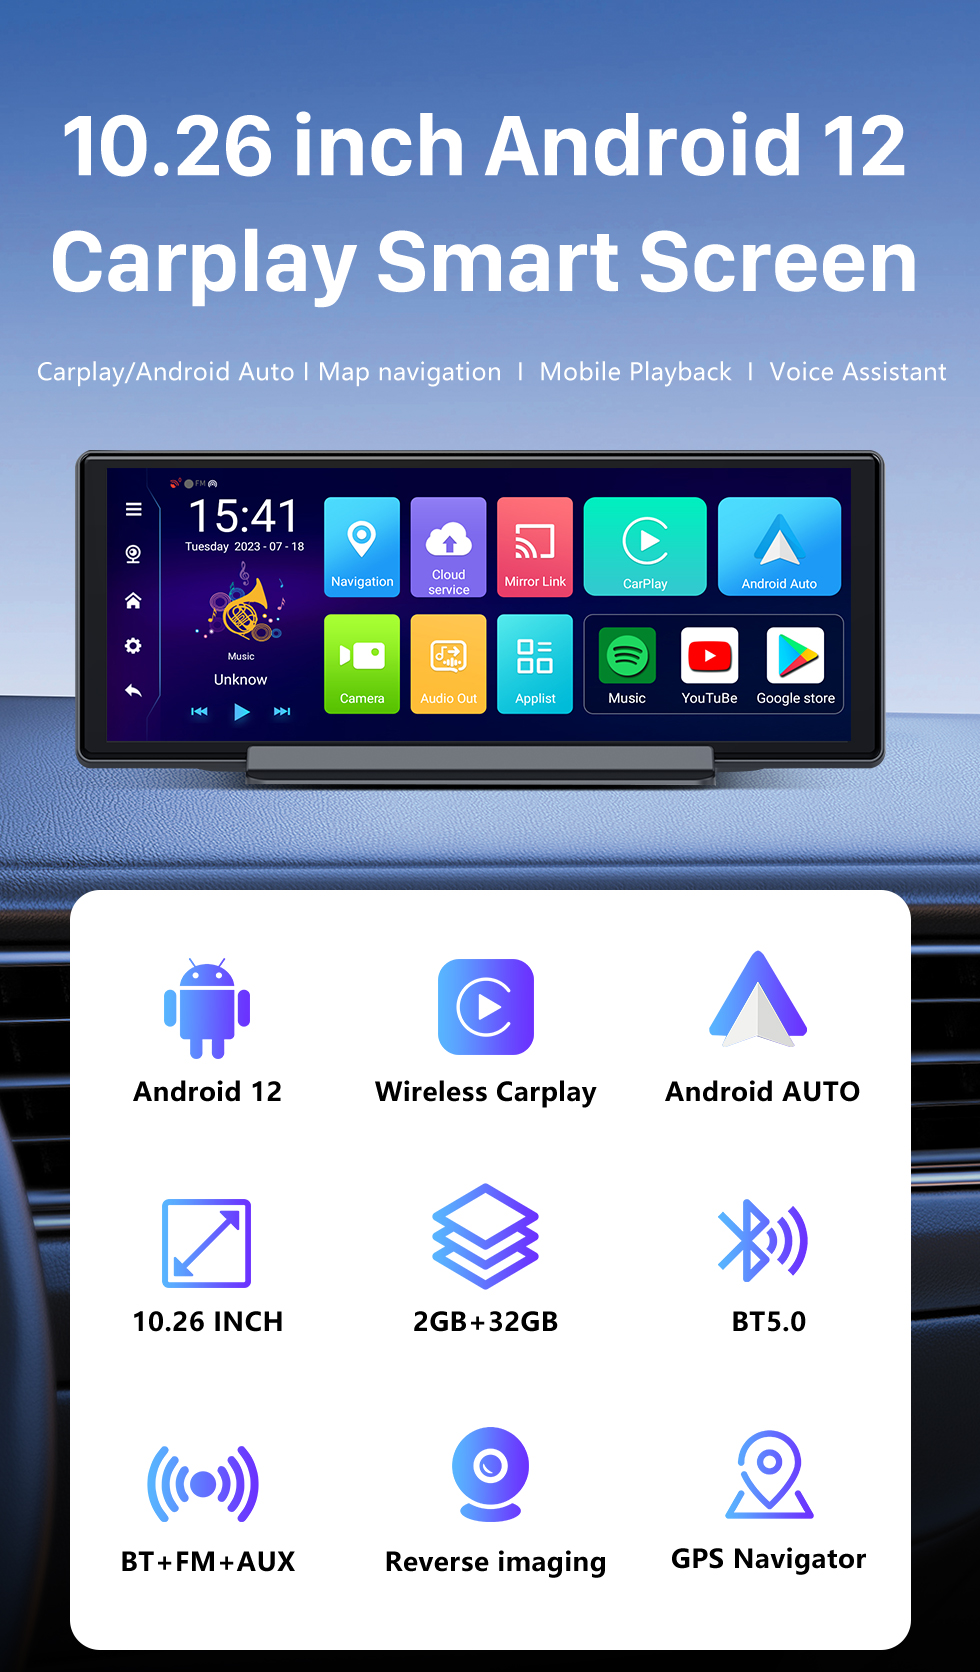 Seicane 10.26 inch Android 12.0 Carplay Smart Screen GPS navigation system with Bluetooth TouchScreen support Rearview Camera